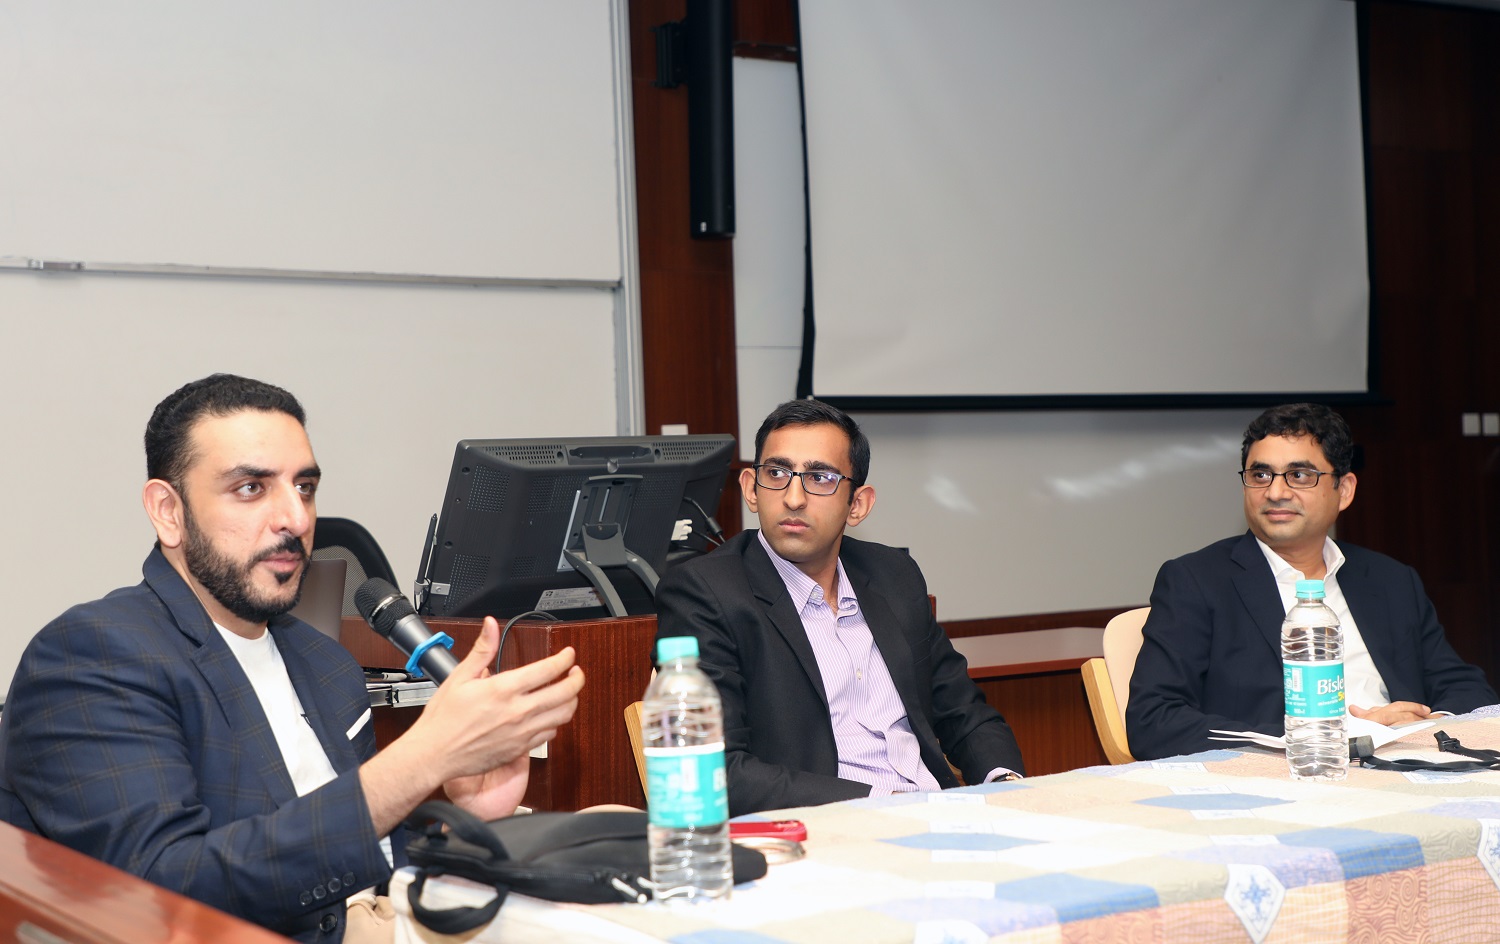 (L-R) Mohit Gulati, Founder, ITI; Prof. Anirudh Dhawan, faculty from the Finance and Accounting area, IIMB, and Imran Jafar, Managing Partner, Gaja Capital, at the panel discussion on: ‘Evolution of start-up space in India and its future’.